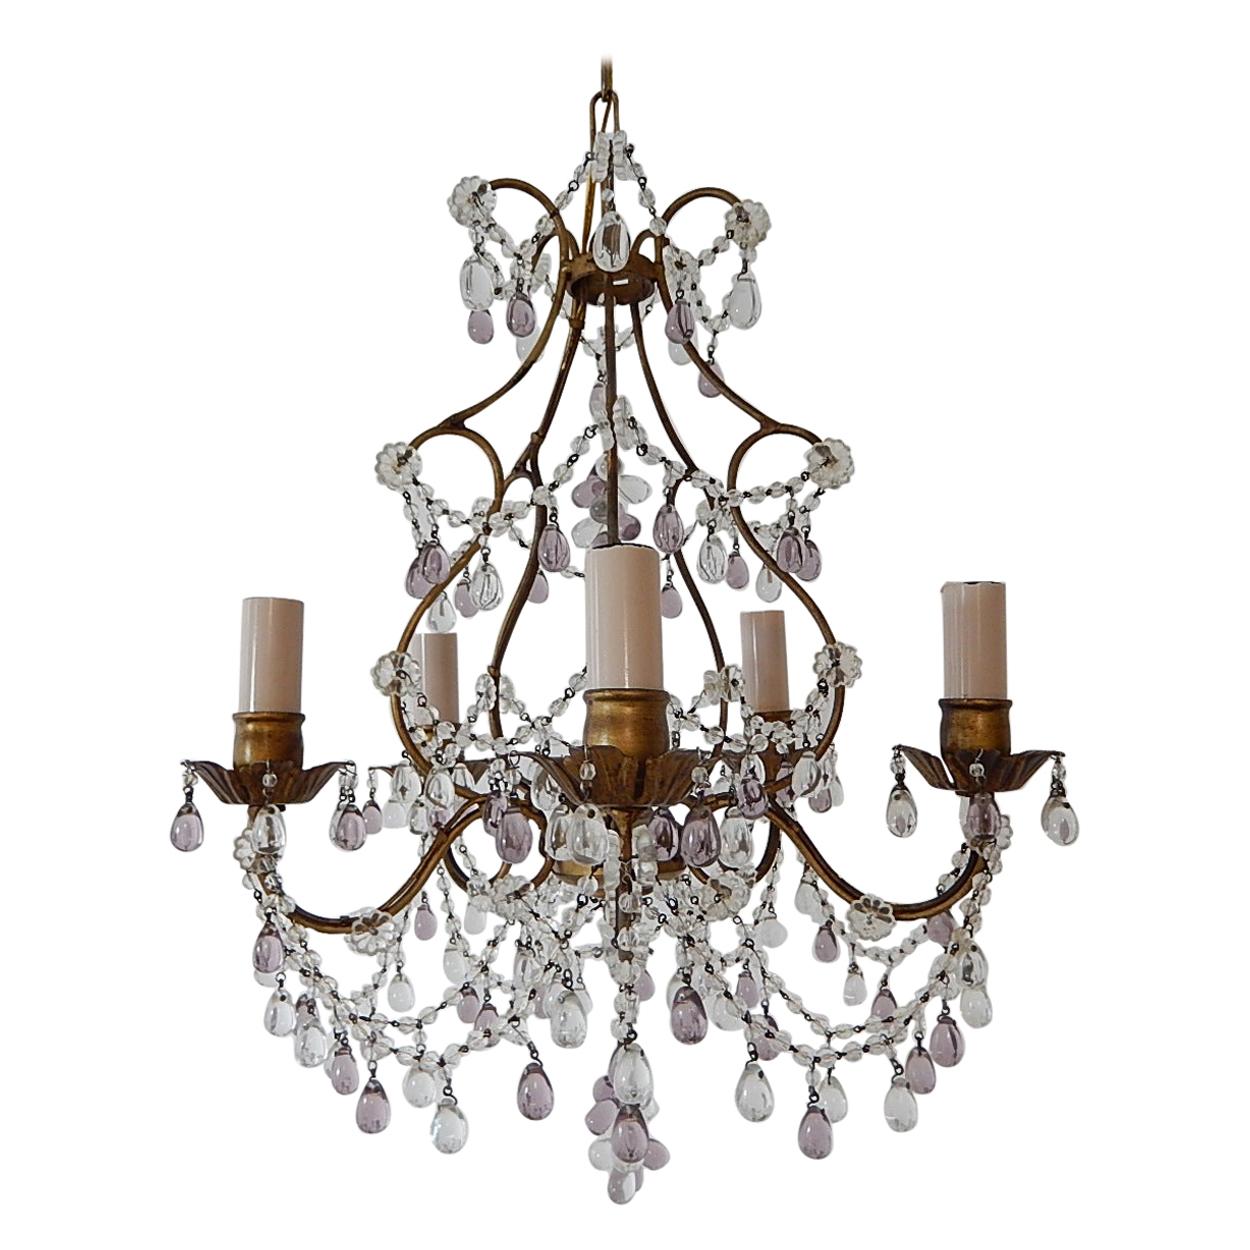 French Beaded Maison Baguès  Amethyst & Clear Murano Drops Chandelier, 1920s For Sale